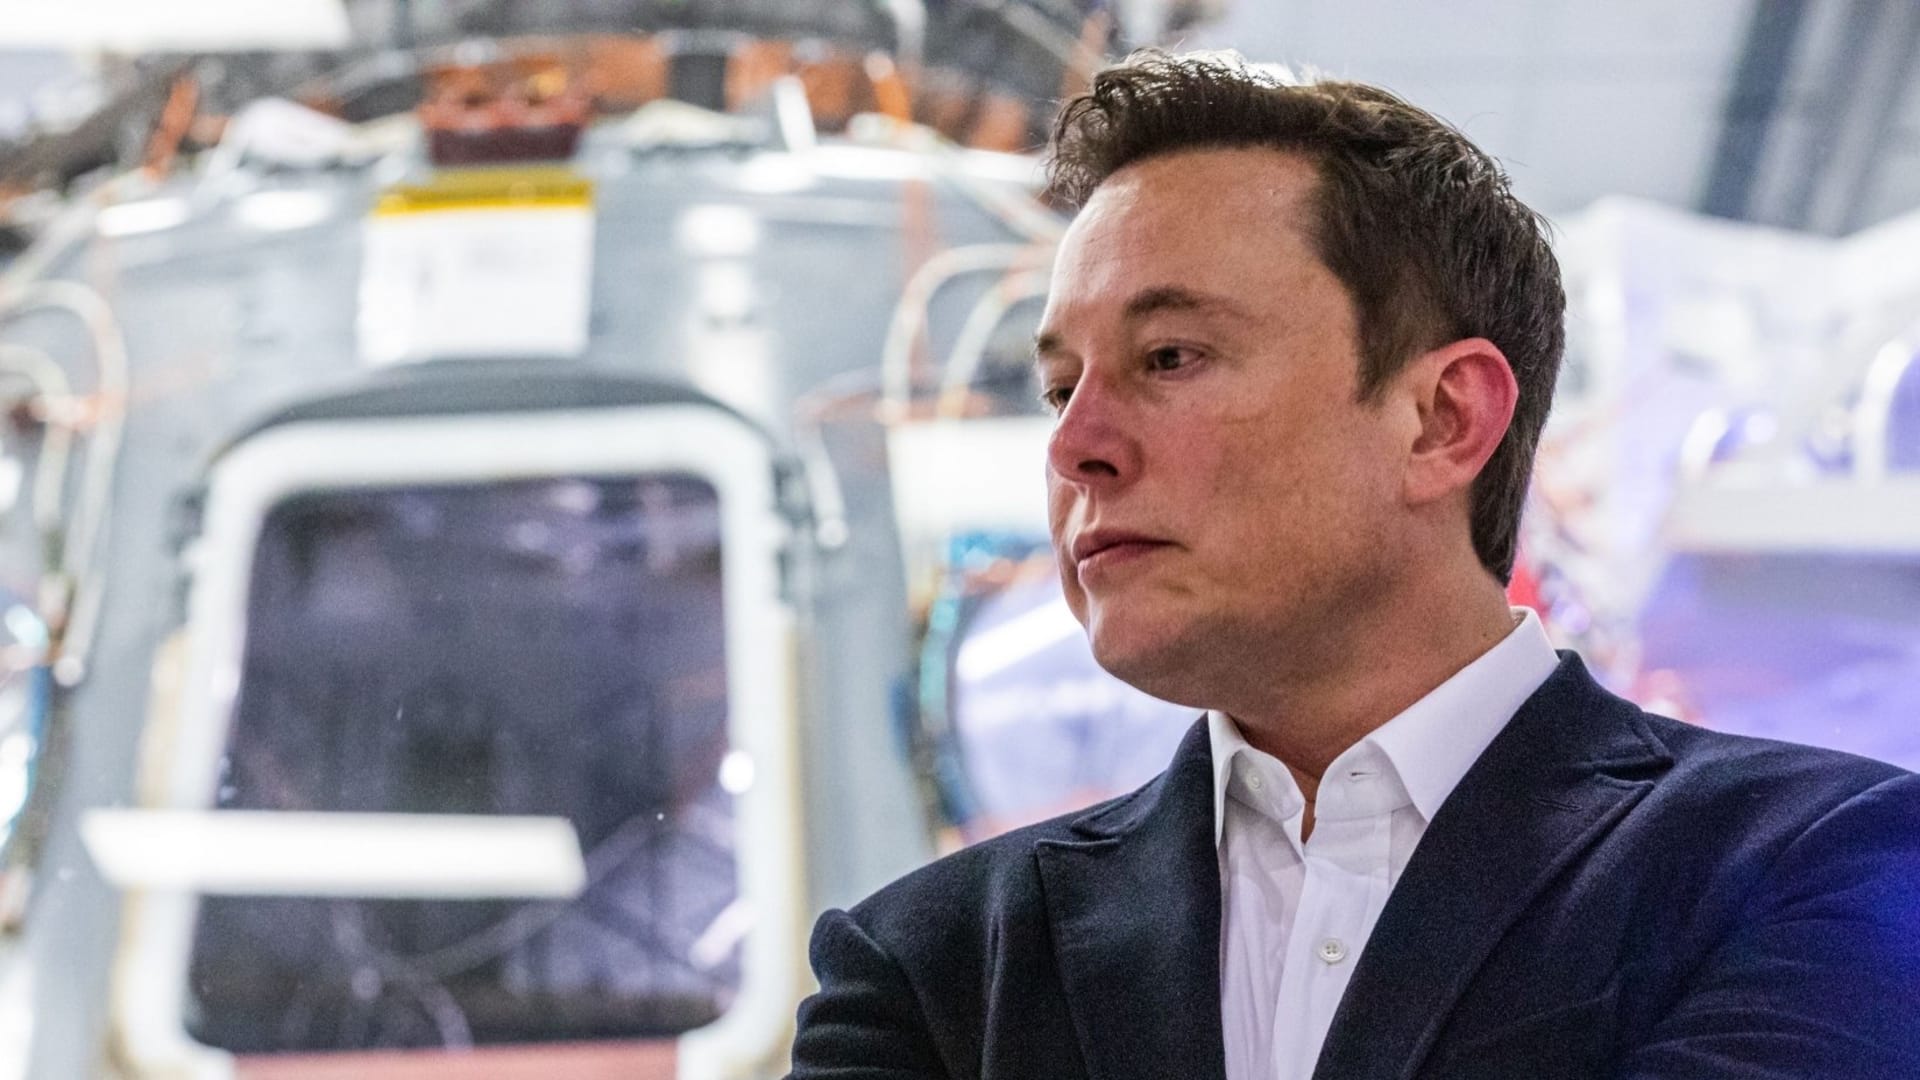 Intelligent Minds Like Elon Musk and Jeff Bezos Seek to Master This Crucial Skill. You Can Too